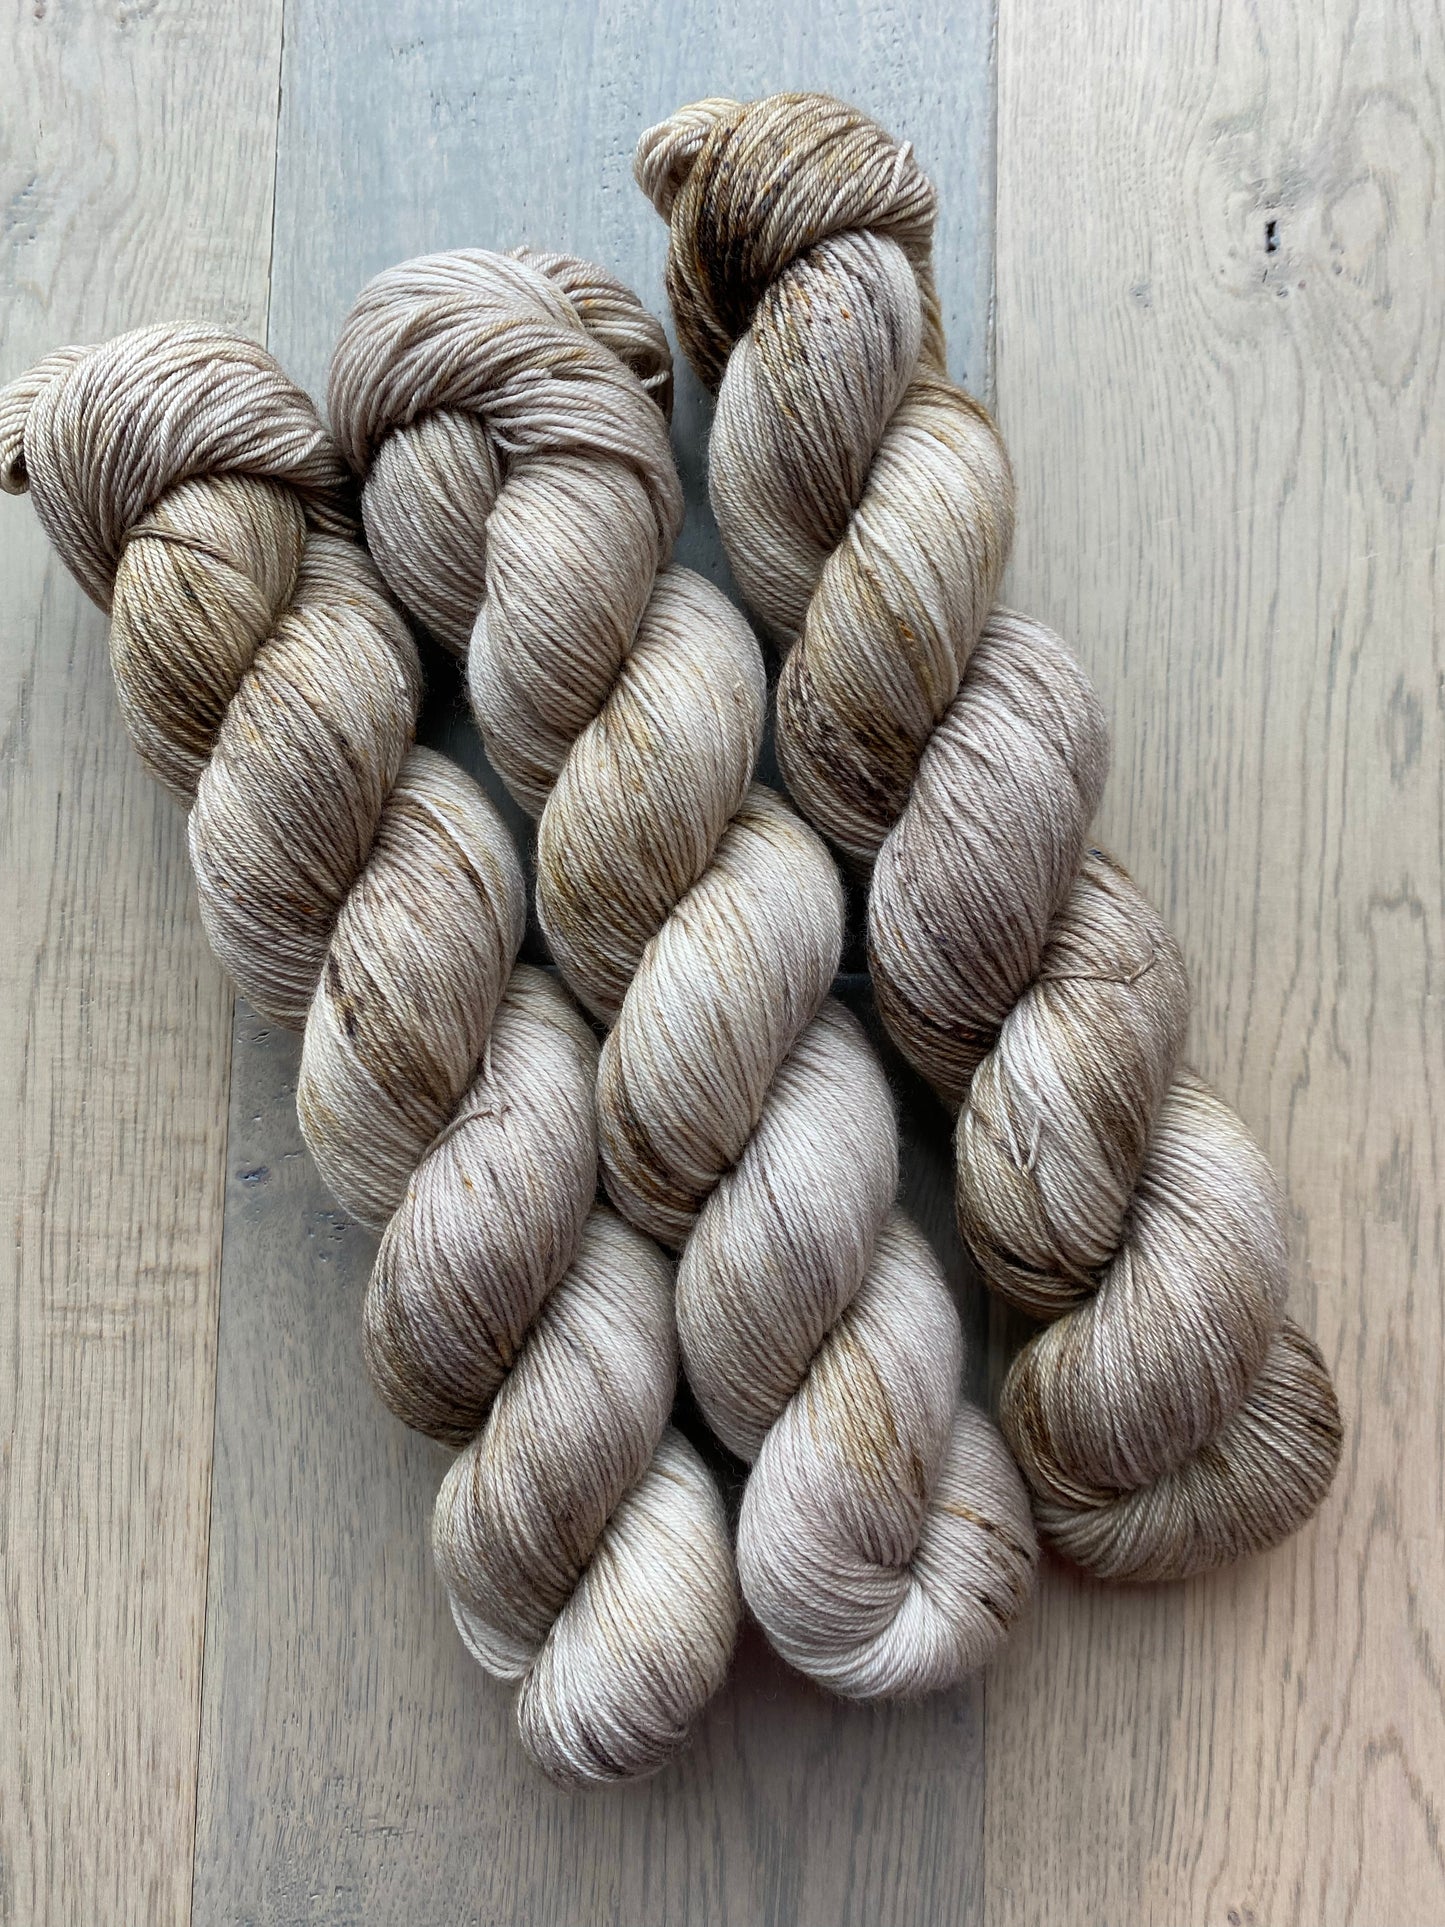 Chocolate Chip Cookie Dough Fingering Yarn